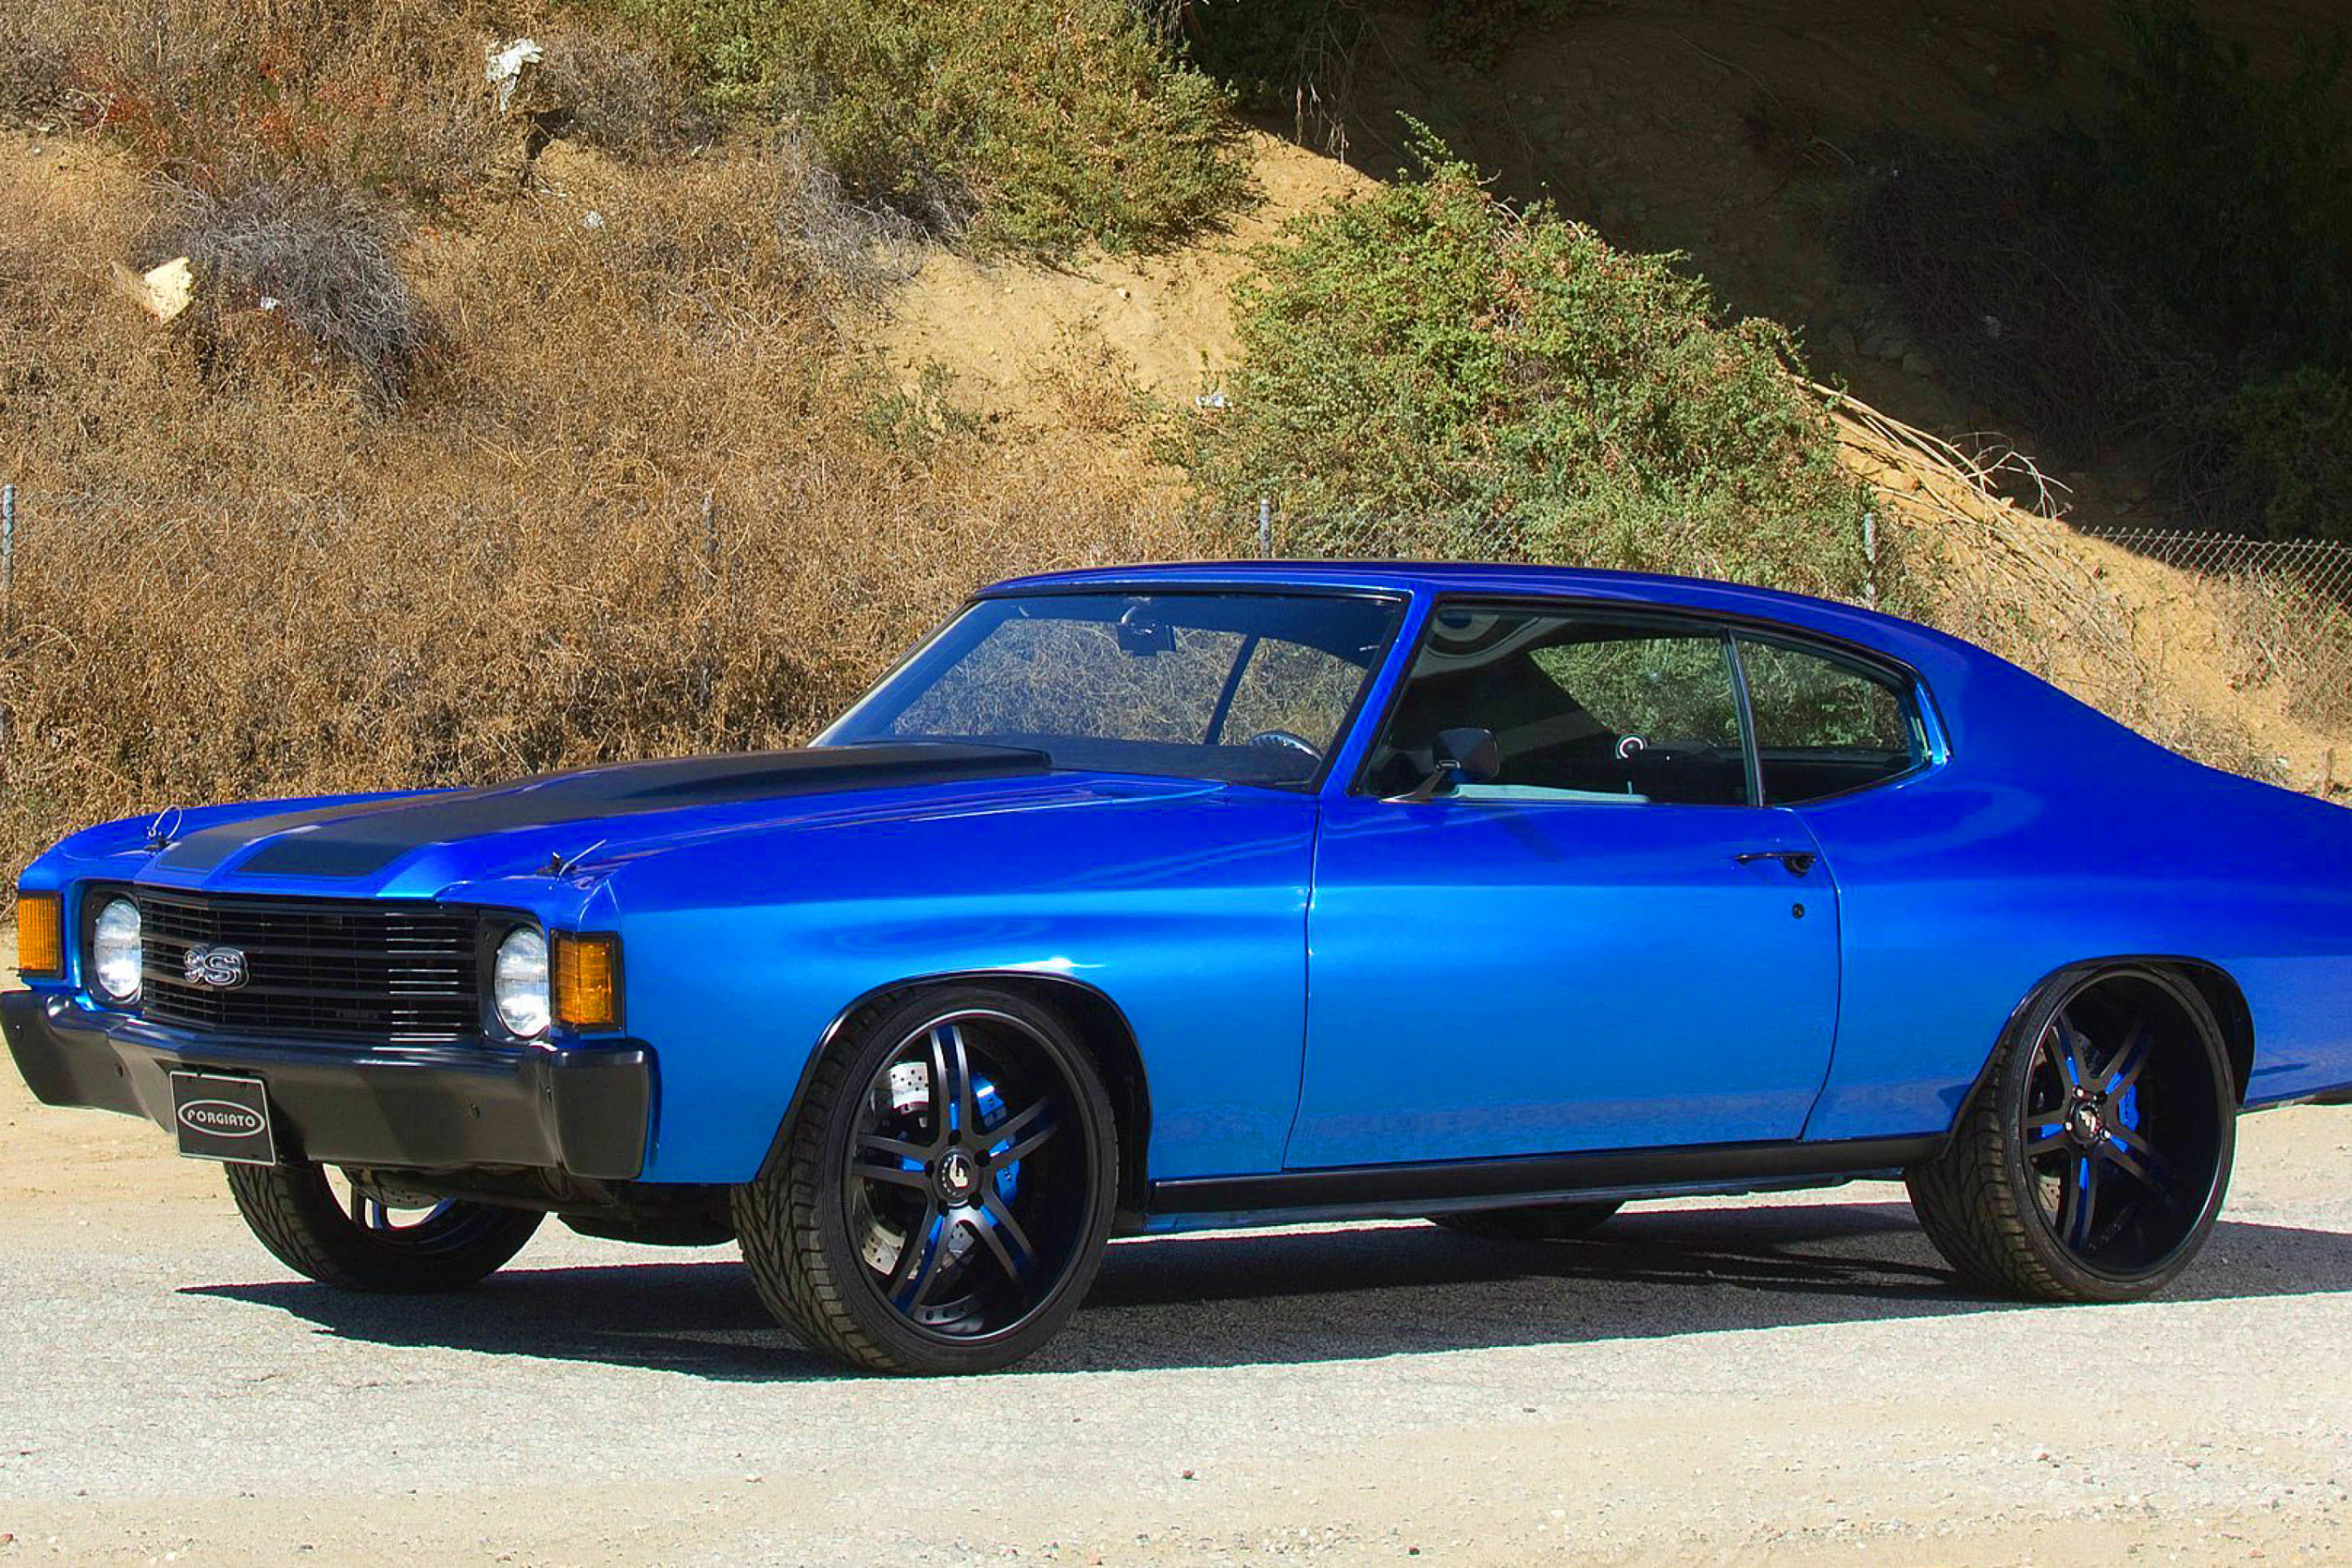 1972 Chevrolet Chevelle SS Coupe wallpaper 2880x1920